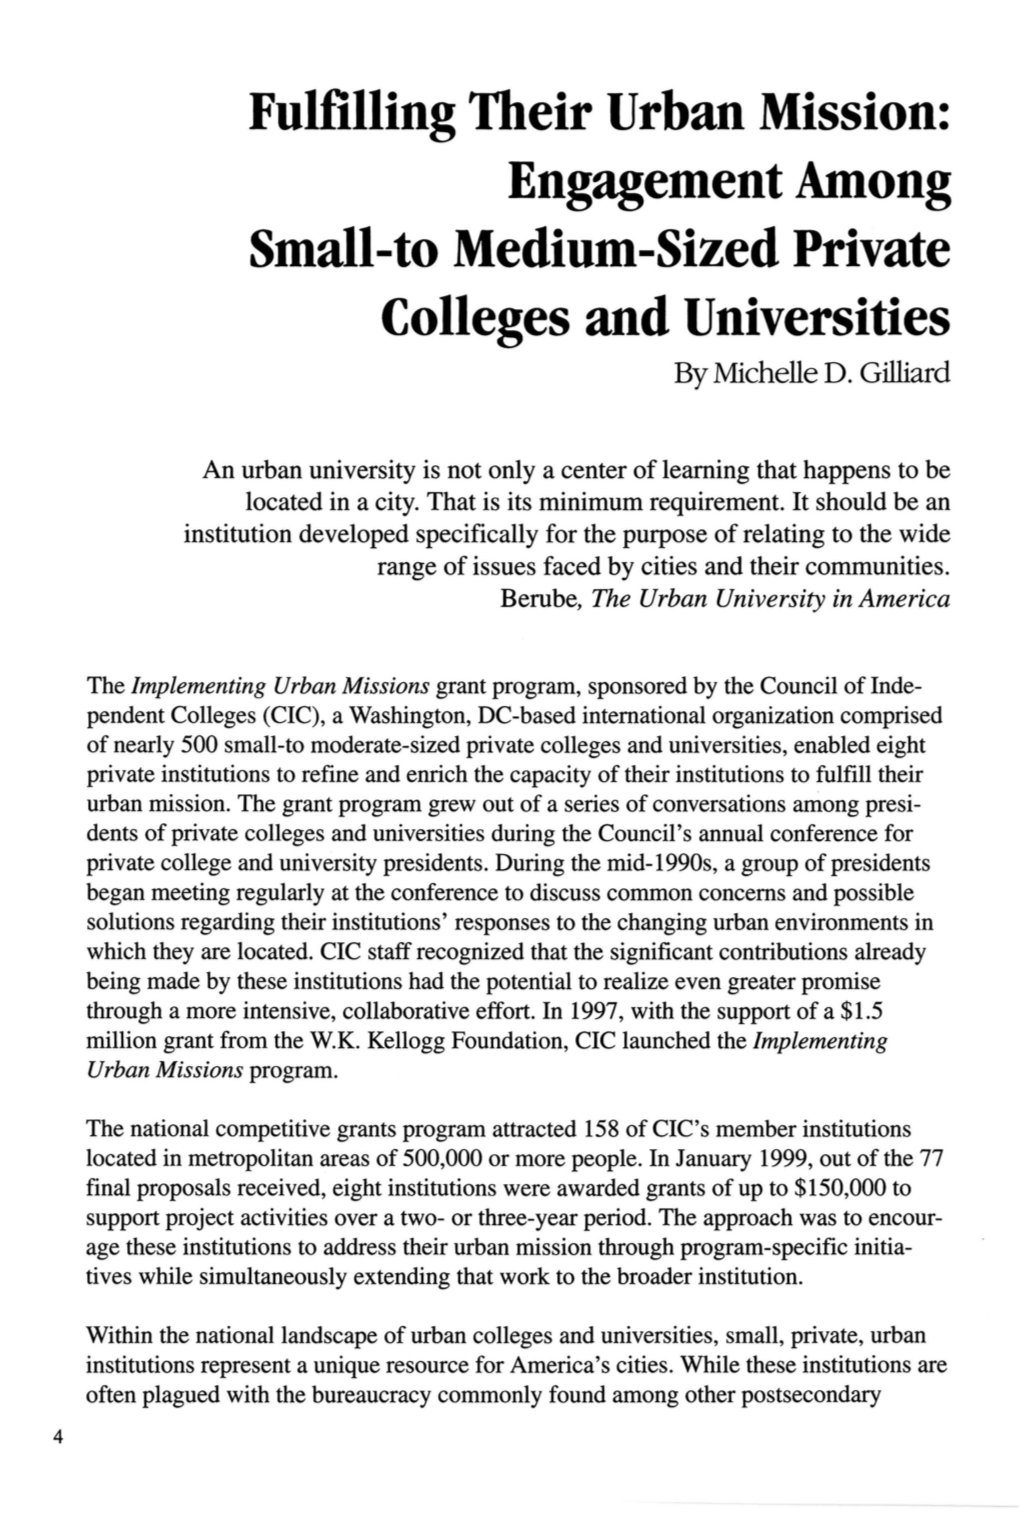 Engagement Among Small-To Medium-Sized Private Colleges and Universities by Michelle D